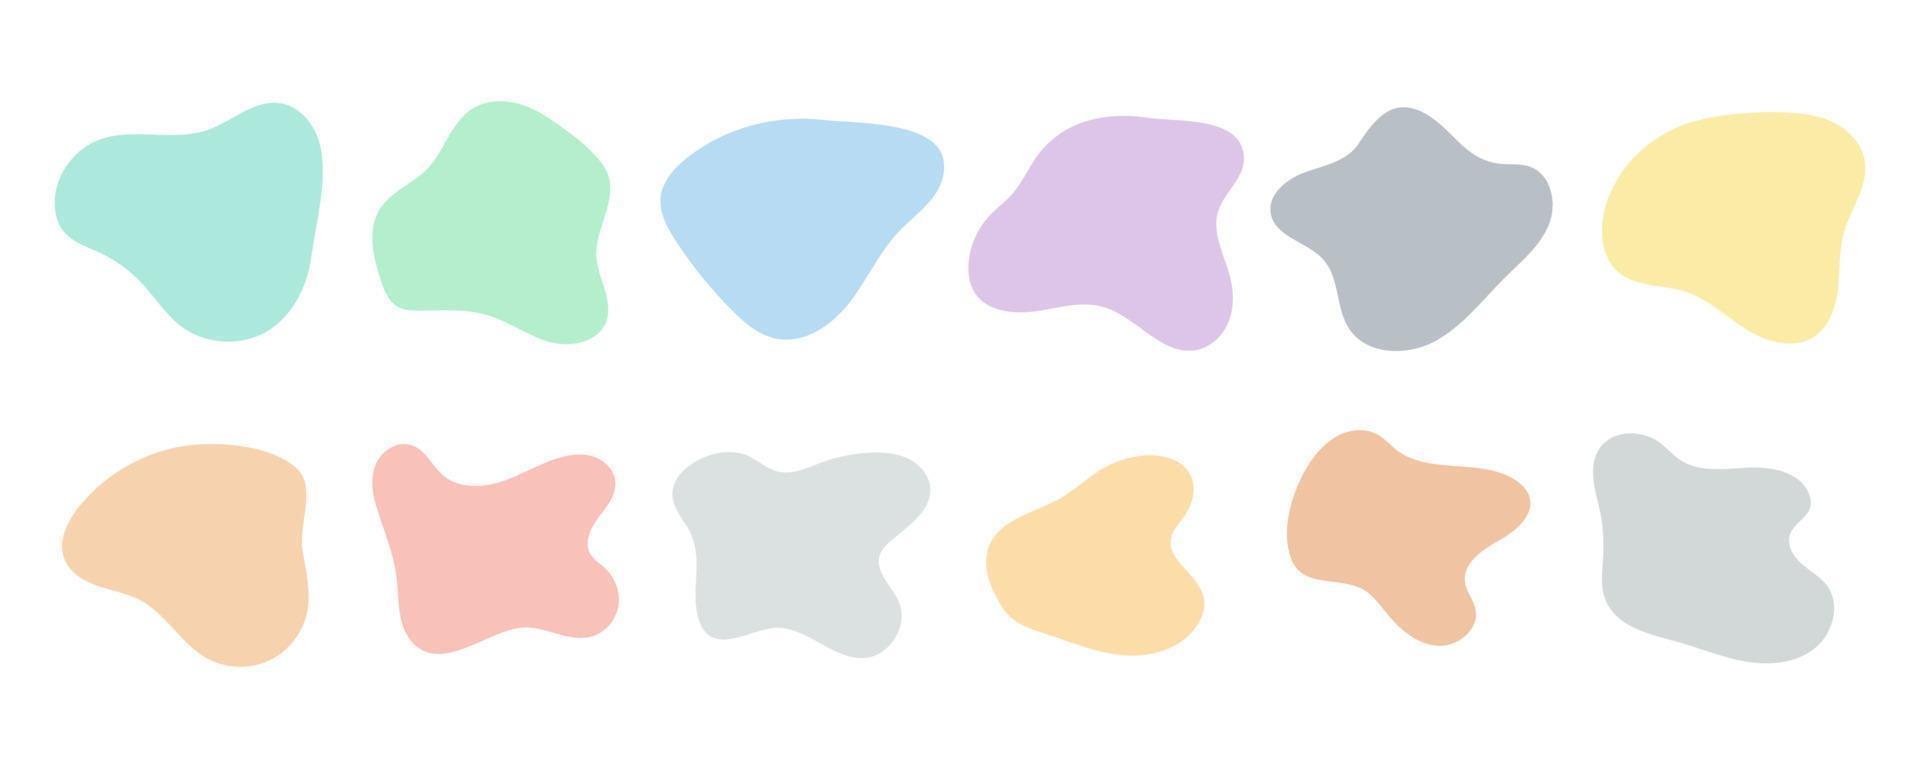 Collection of irregular round blots forming graphic elements in pastel colors vector